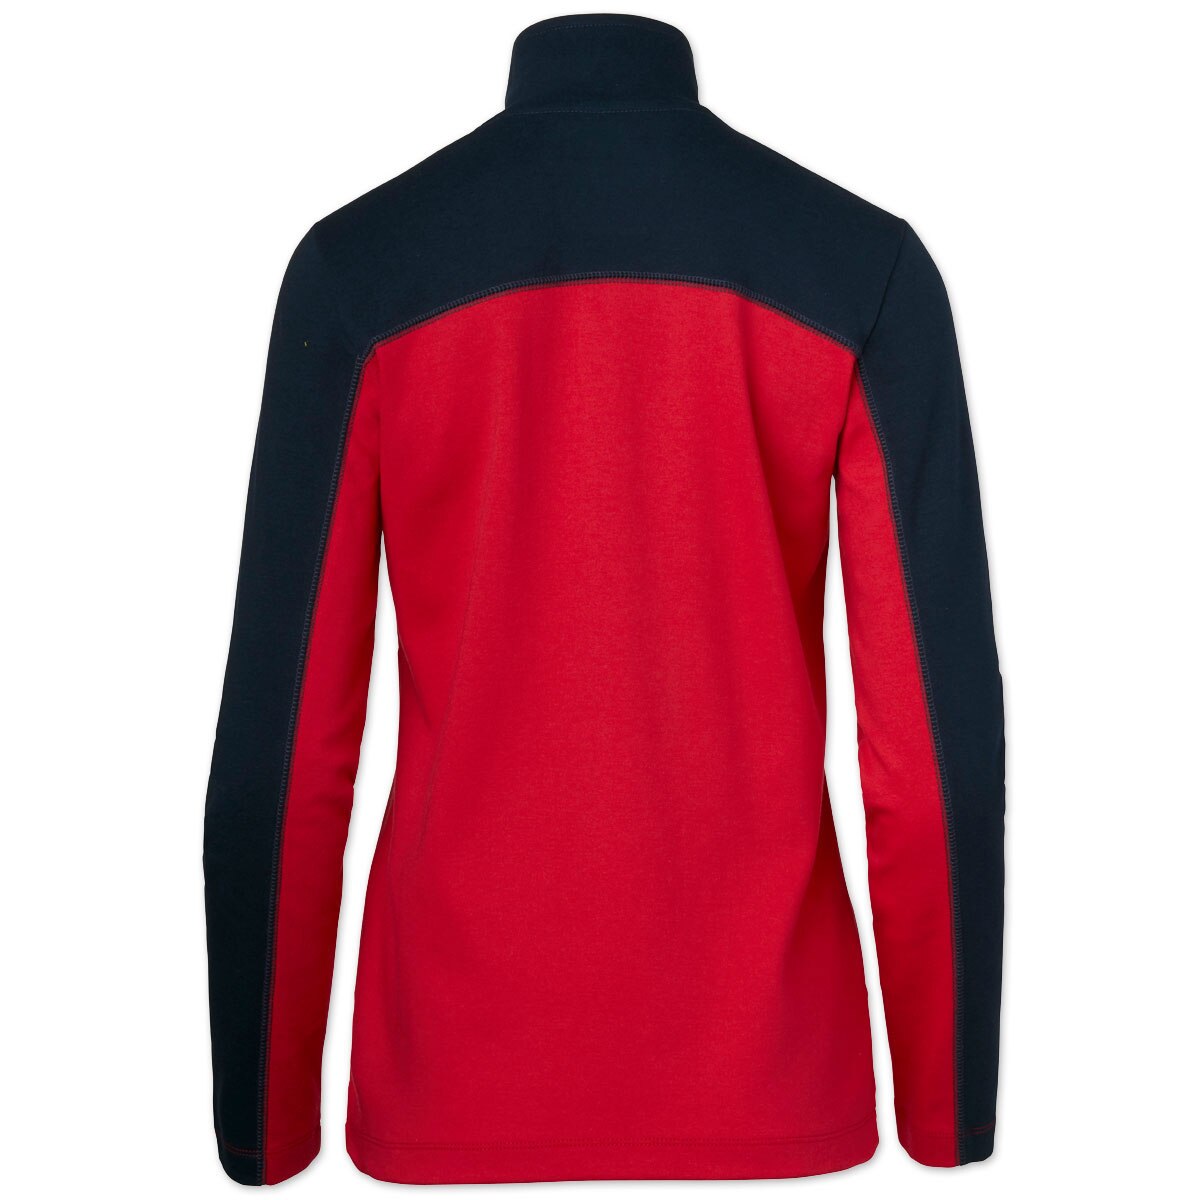 Piper Full Zip Colorblock Jersey by SmartPak